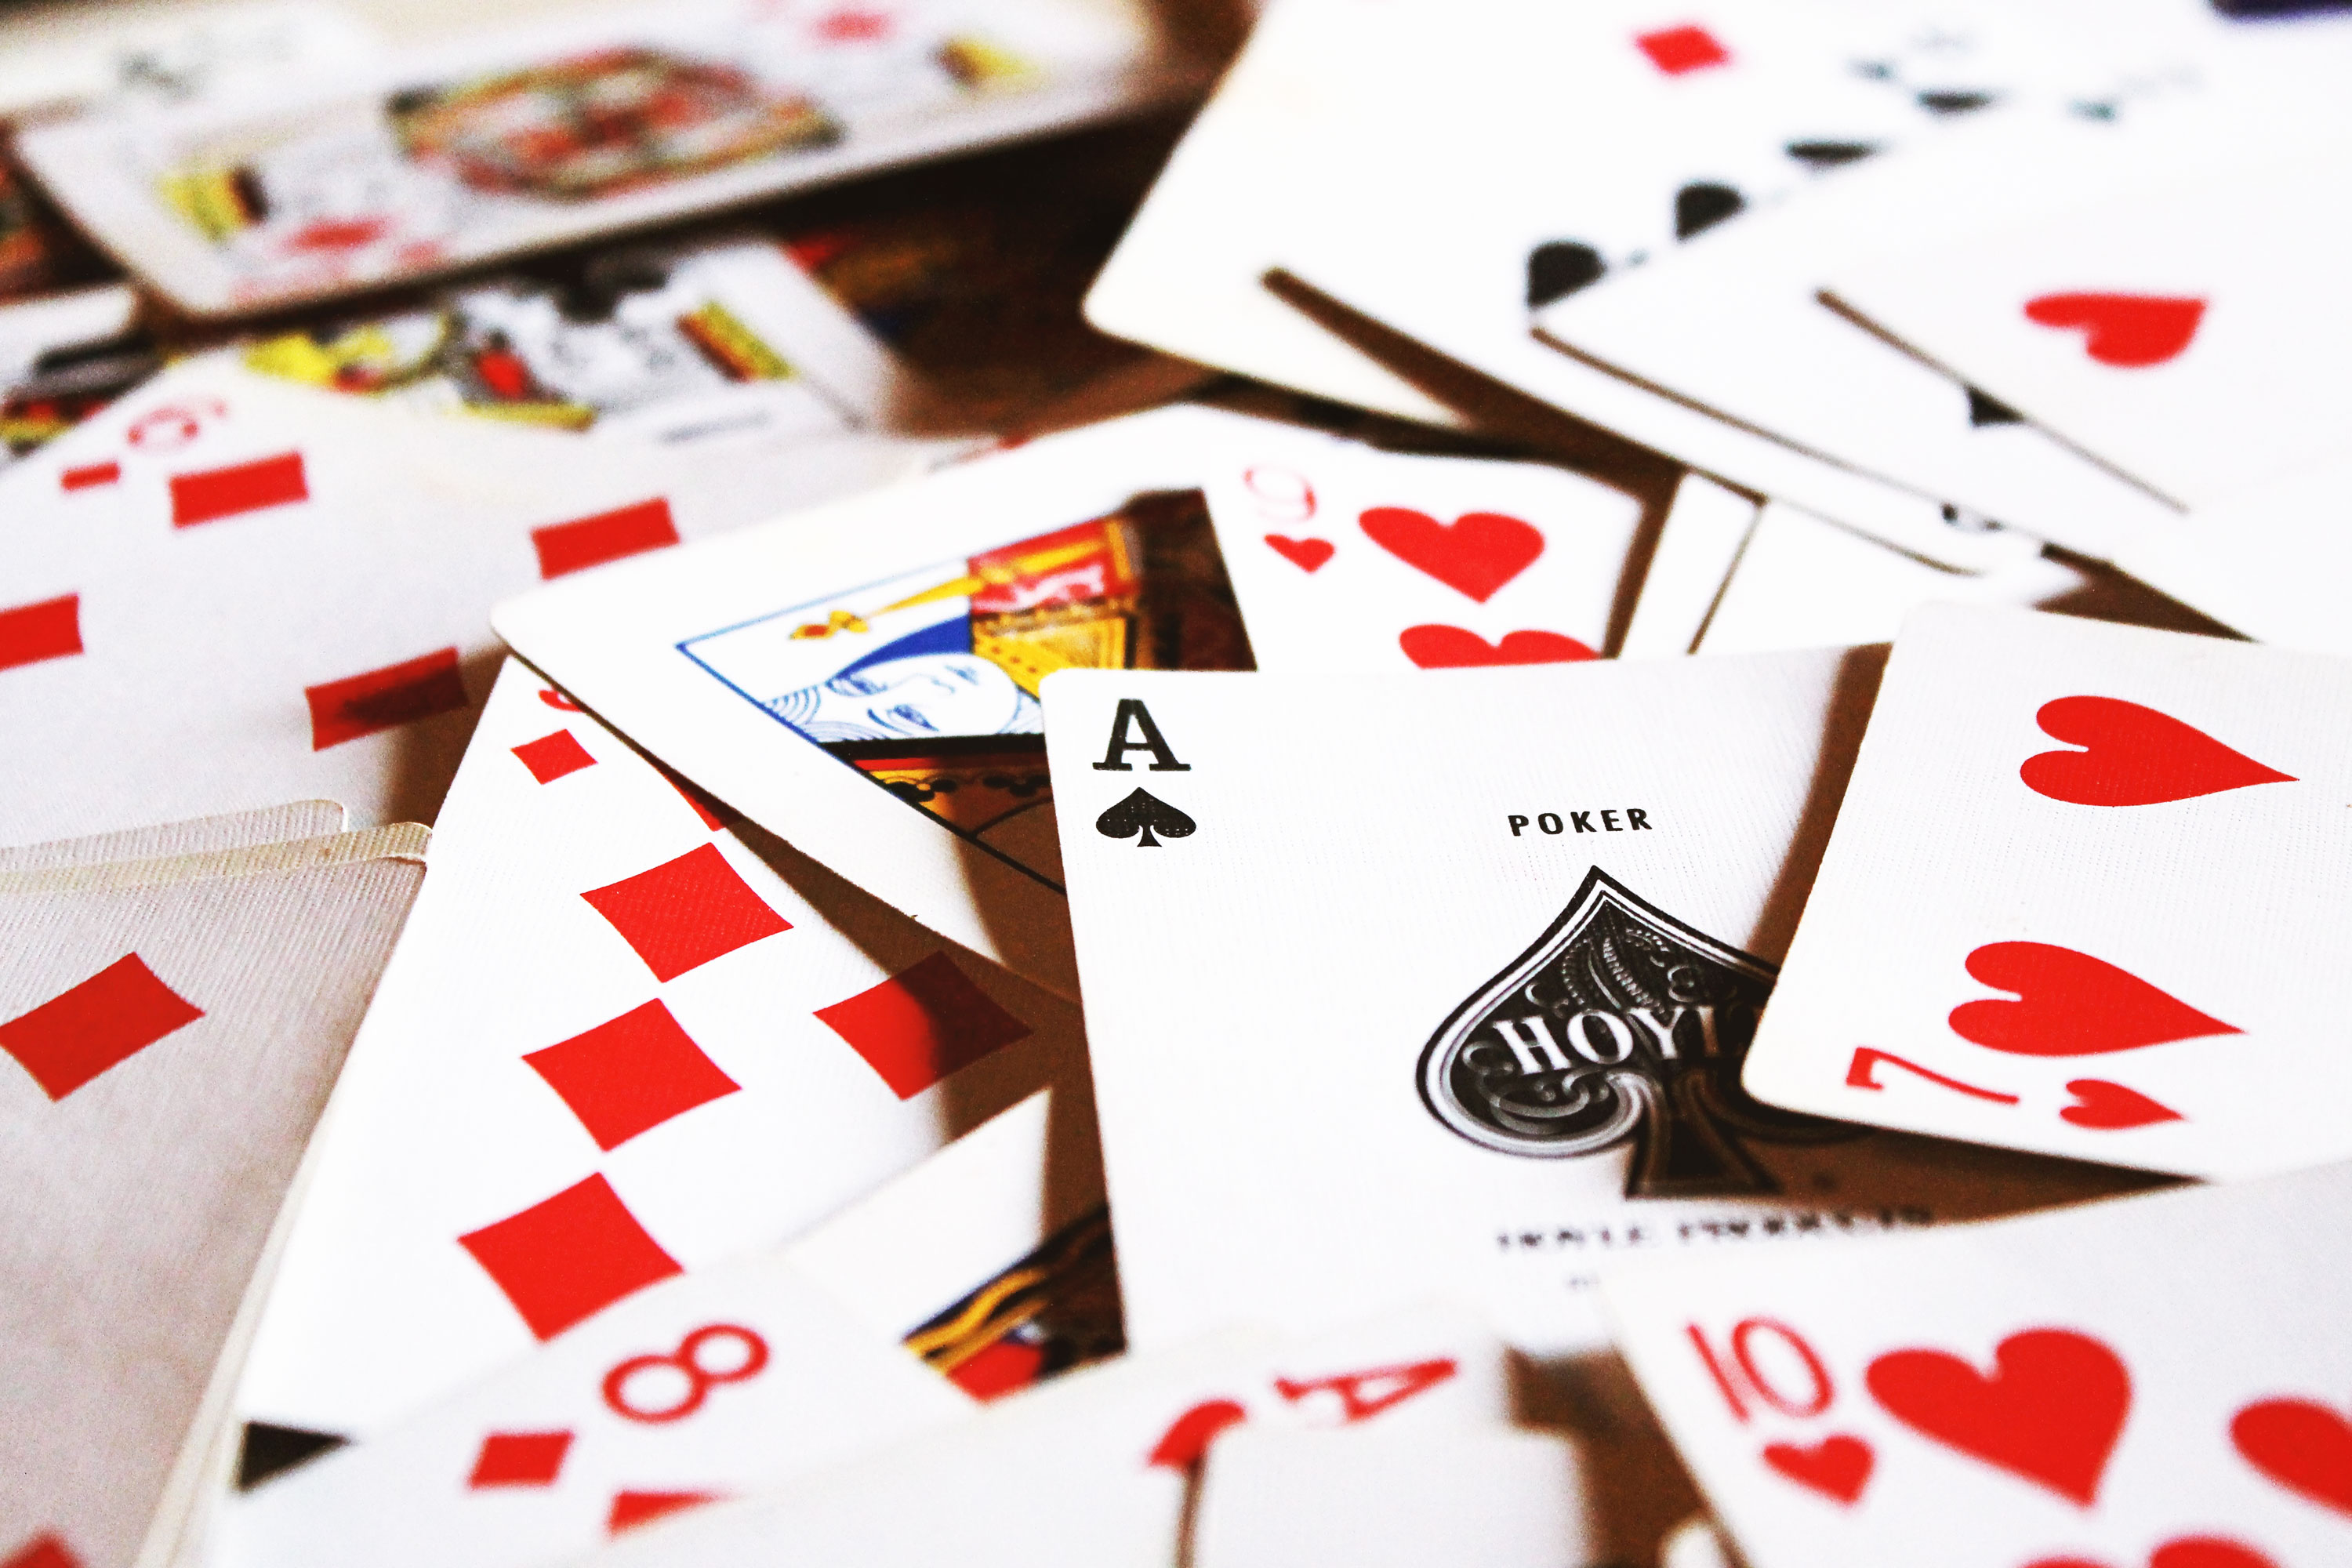 Facebook's new poker-playing AI could wreck the online poker industry—so it's not being released | MIT Technology Review